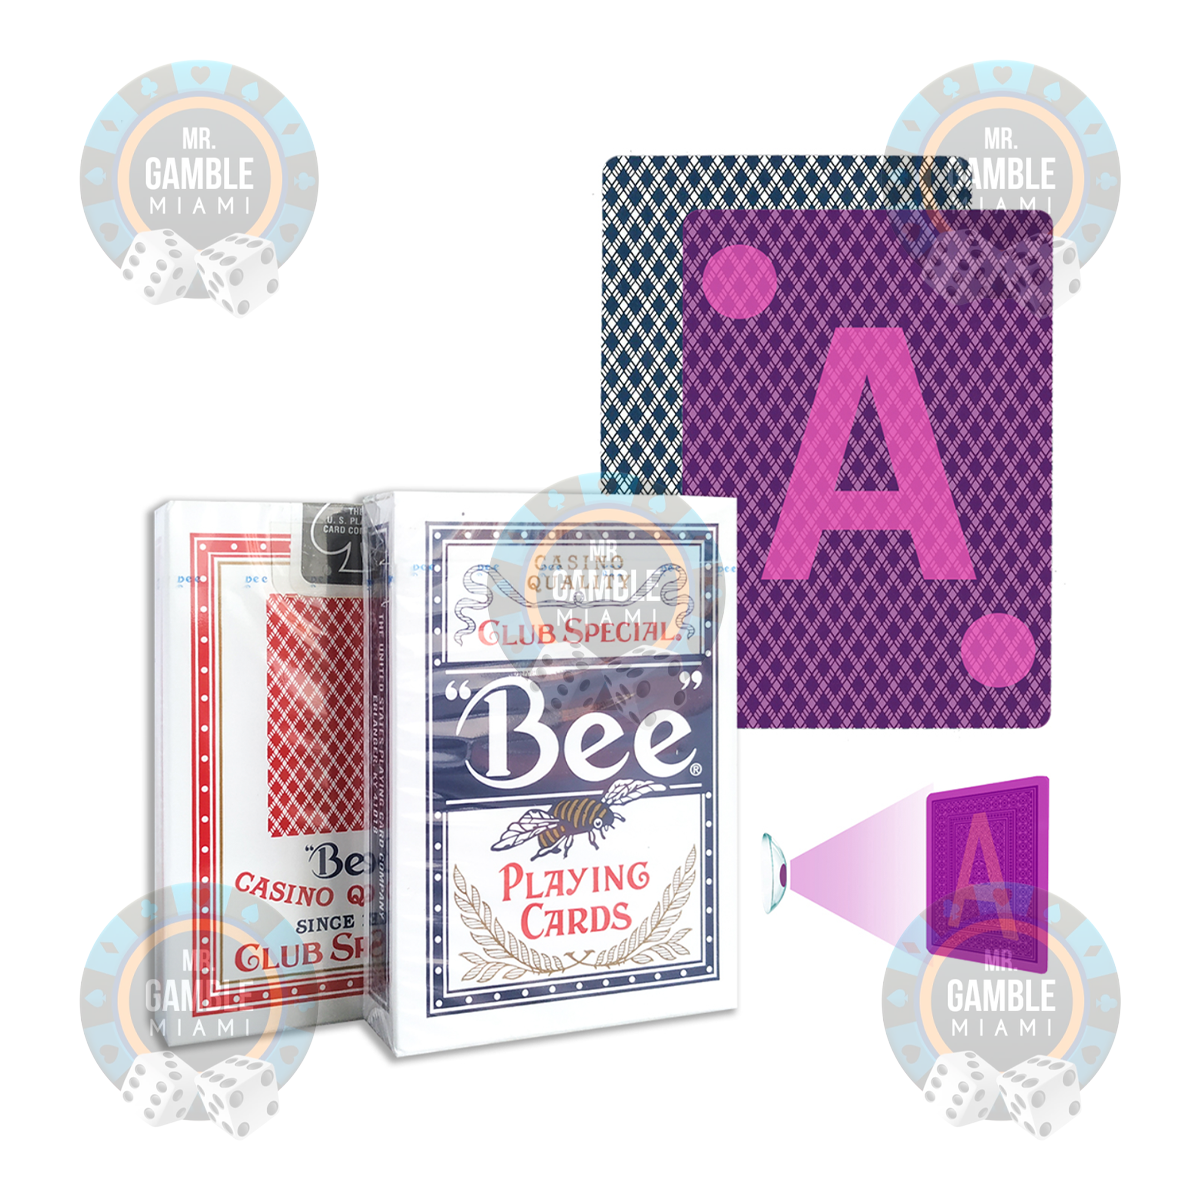 Bee Standard UV Marked Cards with intricate, invisible markings visible under UV light, ideal for enhancing gameplay and magic tricks.